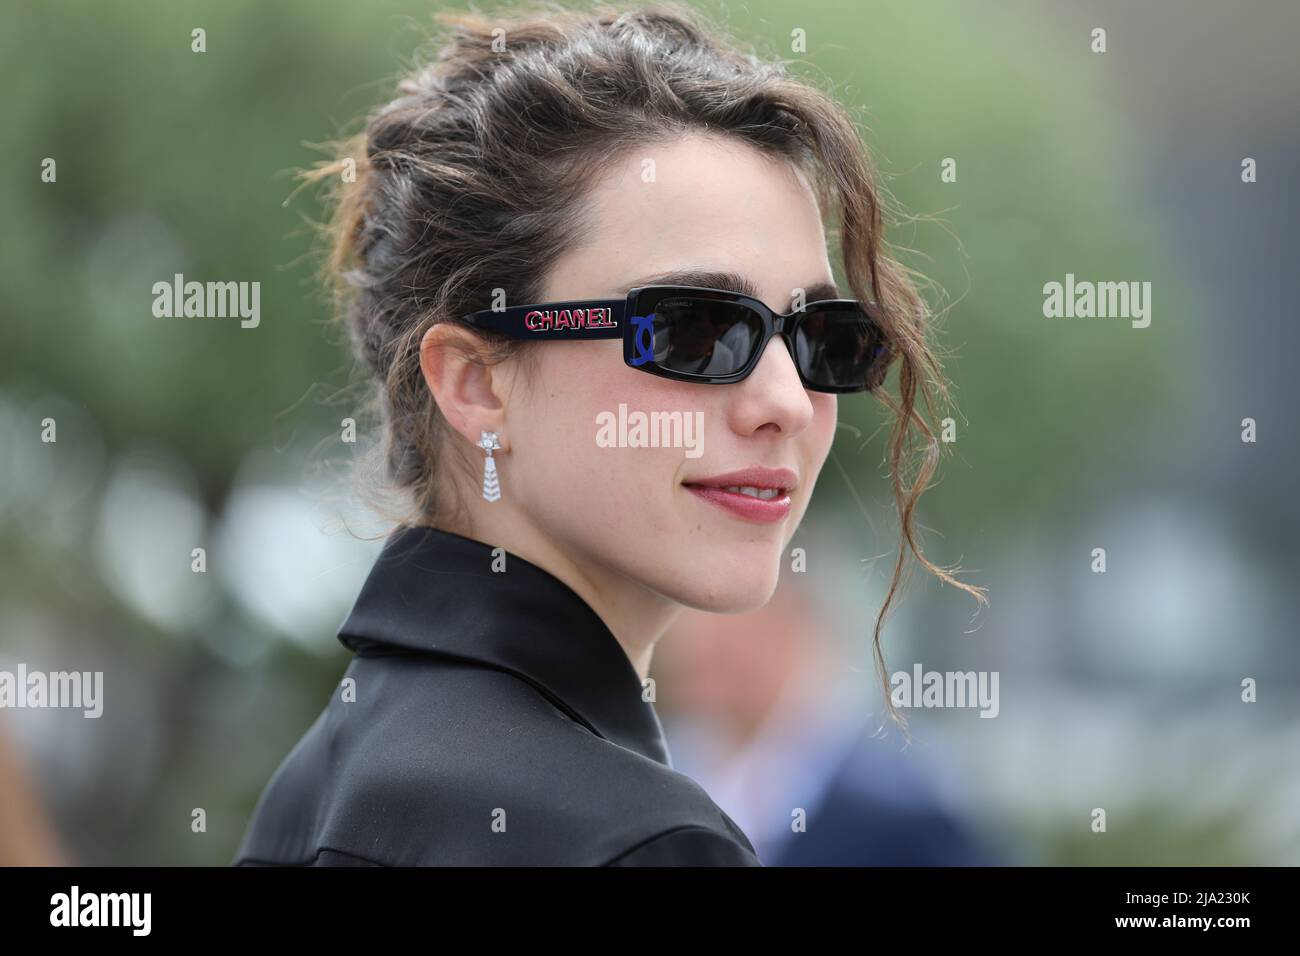 May 26, 2022, Cannes, Cote d'Azur, France: MARGARET QUALLEY wears CHANEL  sunglasses as she attends the STARS AT NOON photocall during 75th annual  Cannes Film Festival (Credit Image: © Mickael Chavet/ZUMA Press